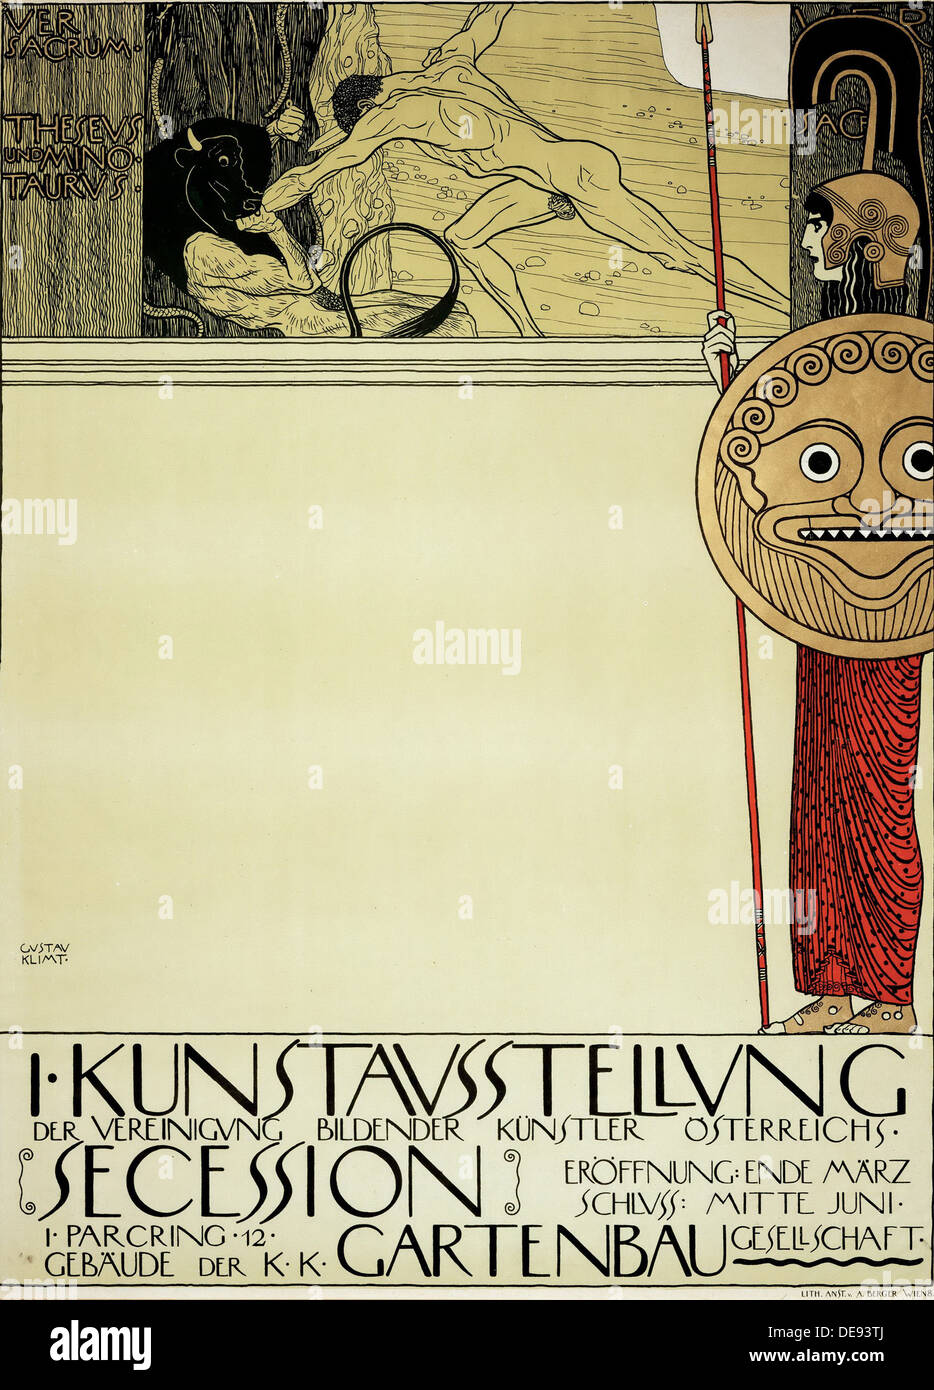 Poster for the First Art Exhibition of the Secession Art Movement, 1898. Artist: Klimt, Gustav (1862-1918) Stock Photo